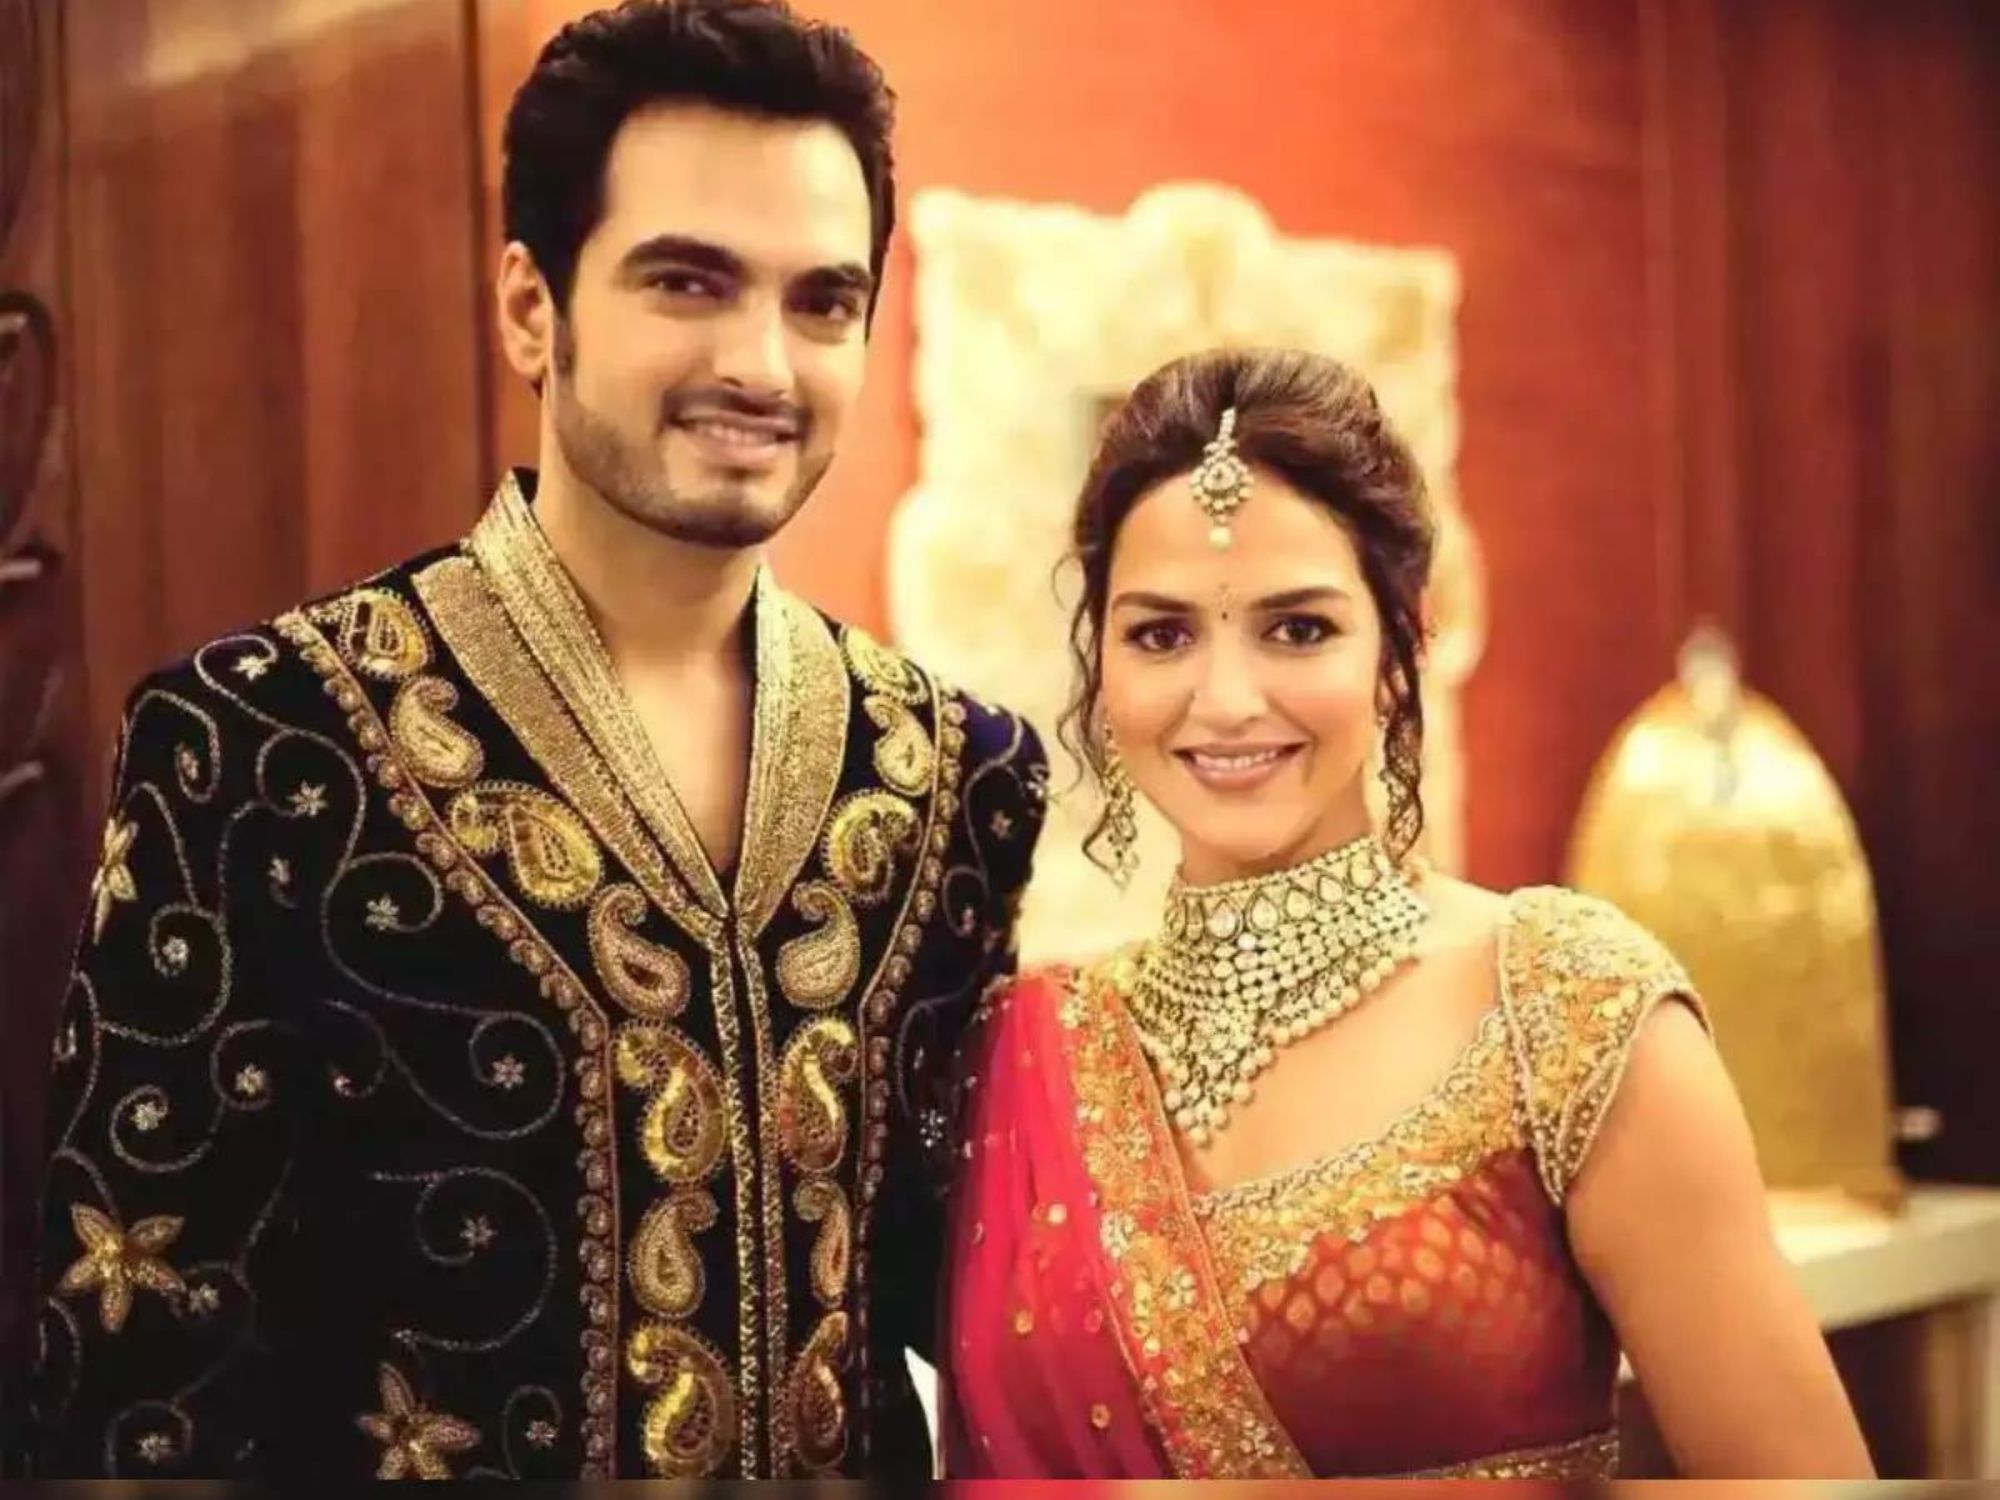 Bollywood Couple Esha Deol and Bharat Takhtani Confirm Amicable Separation After 11 Years of Marriage